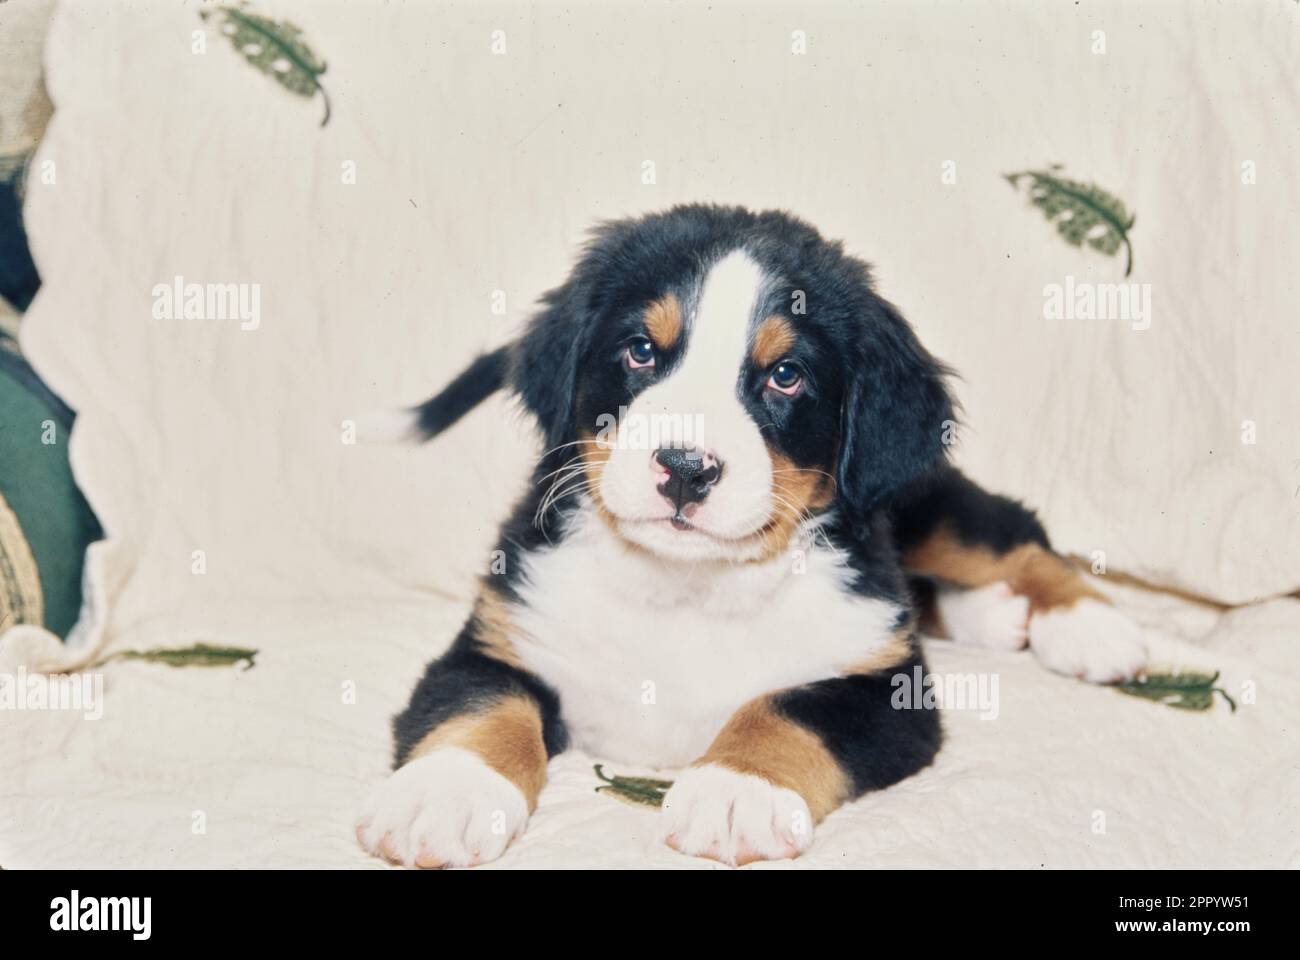 Bernese Mountain Dog puppy on white blanket with leaves Stock Photo